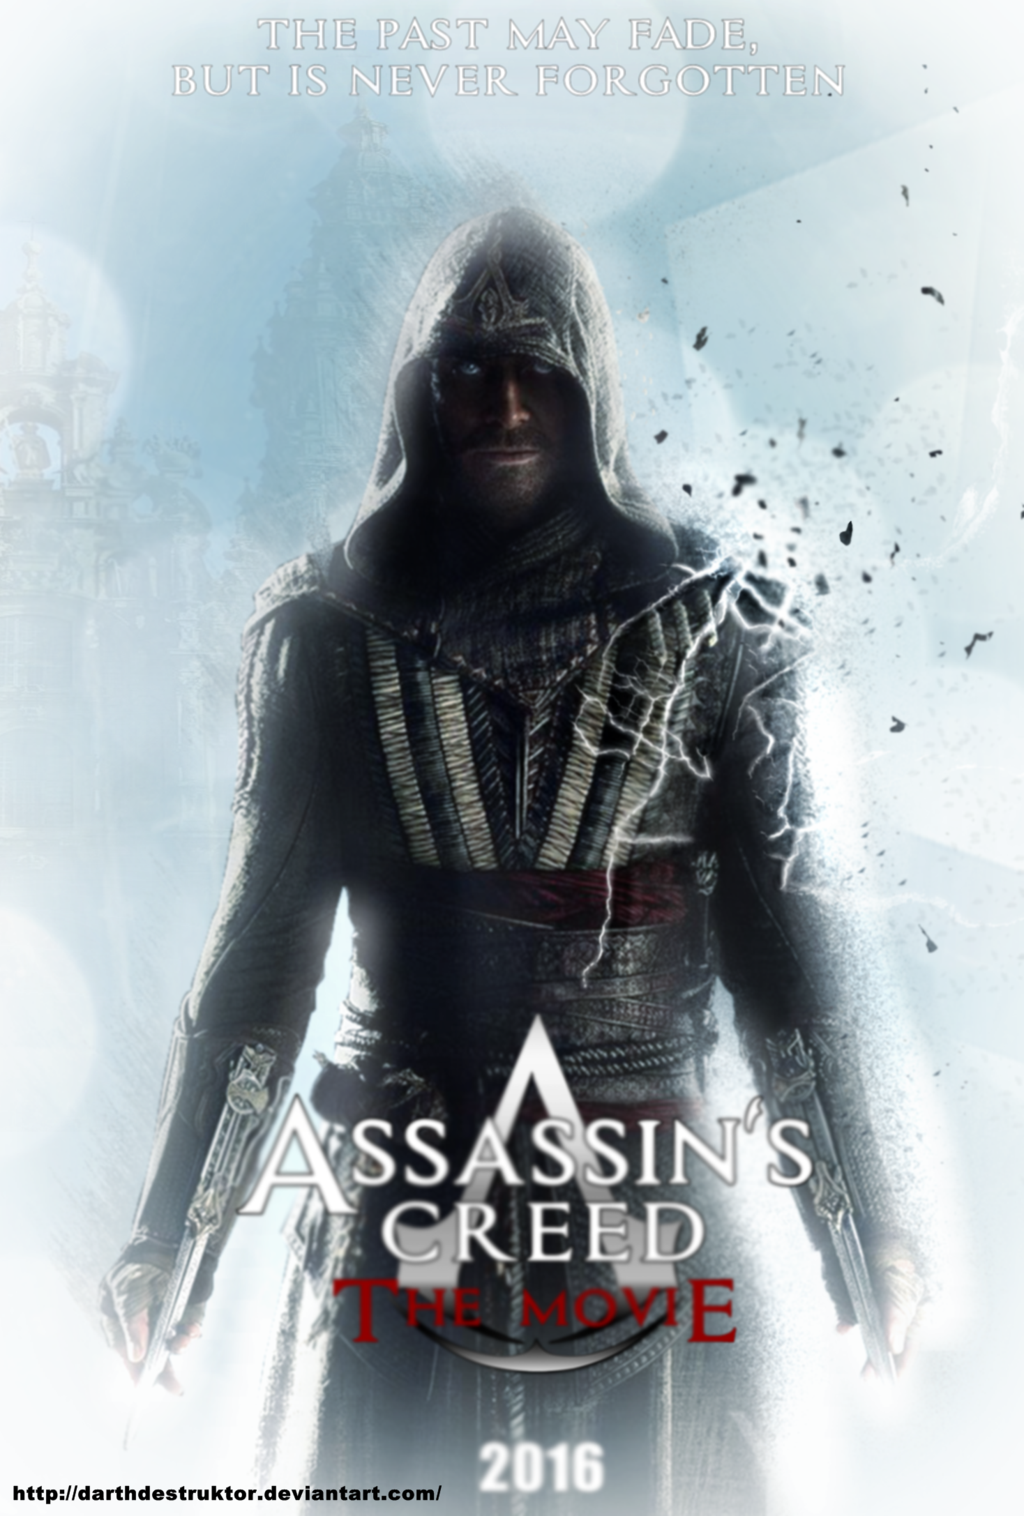 Streaming Assassins Creed 2016 Full Movies Online